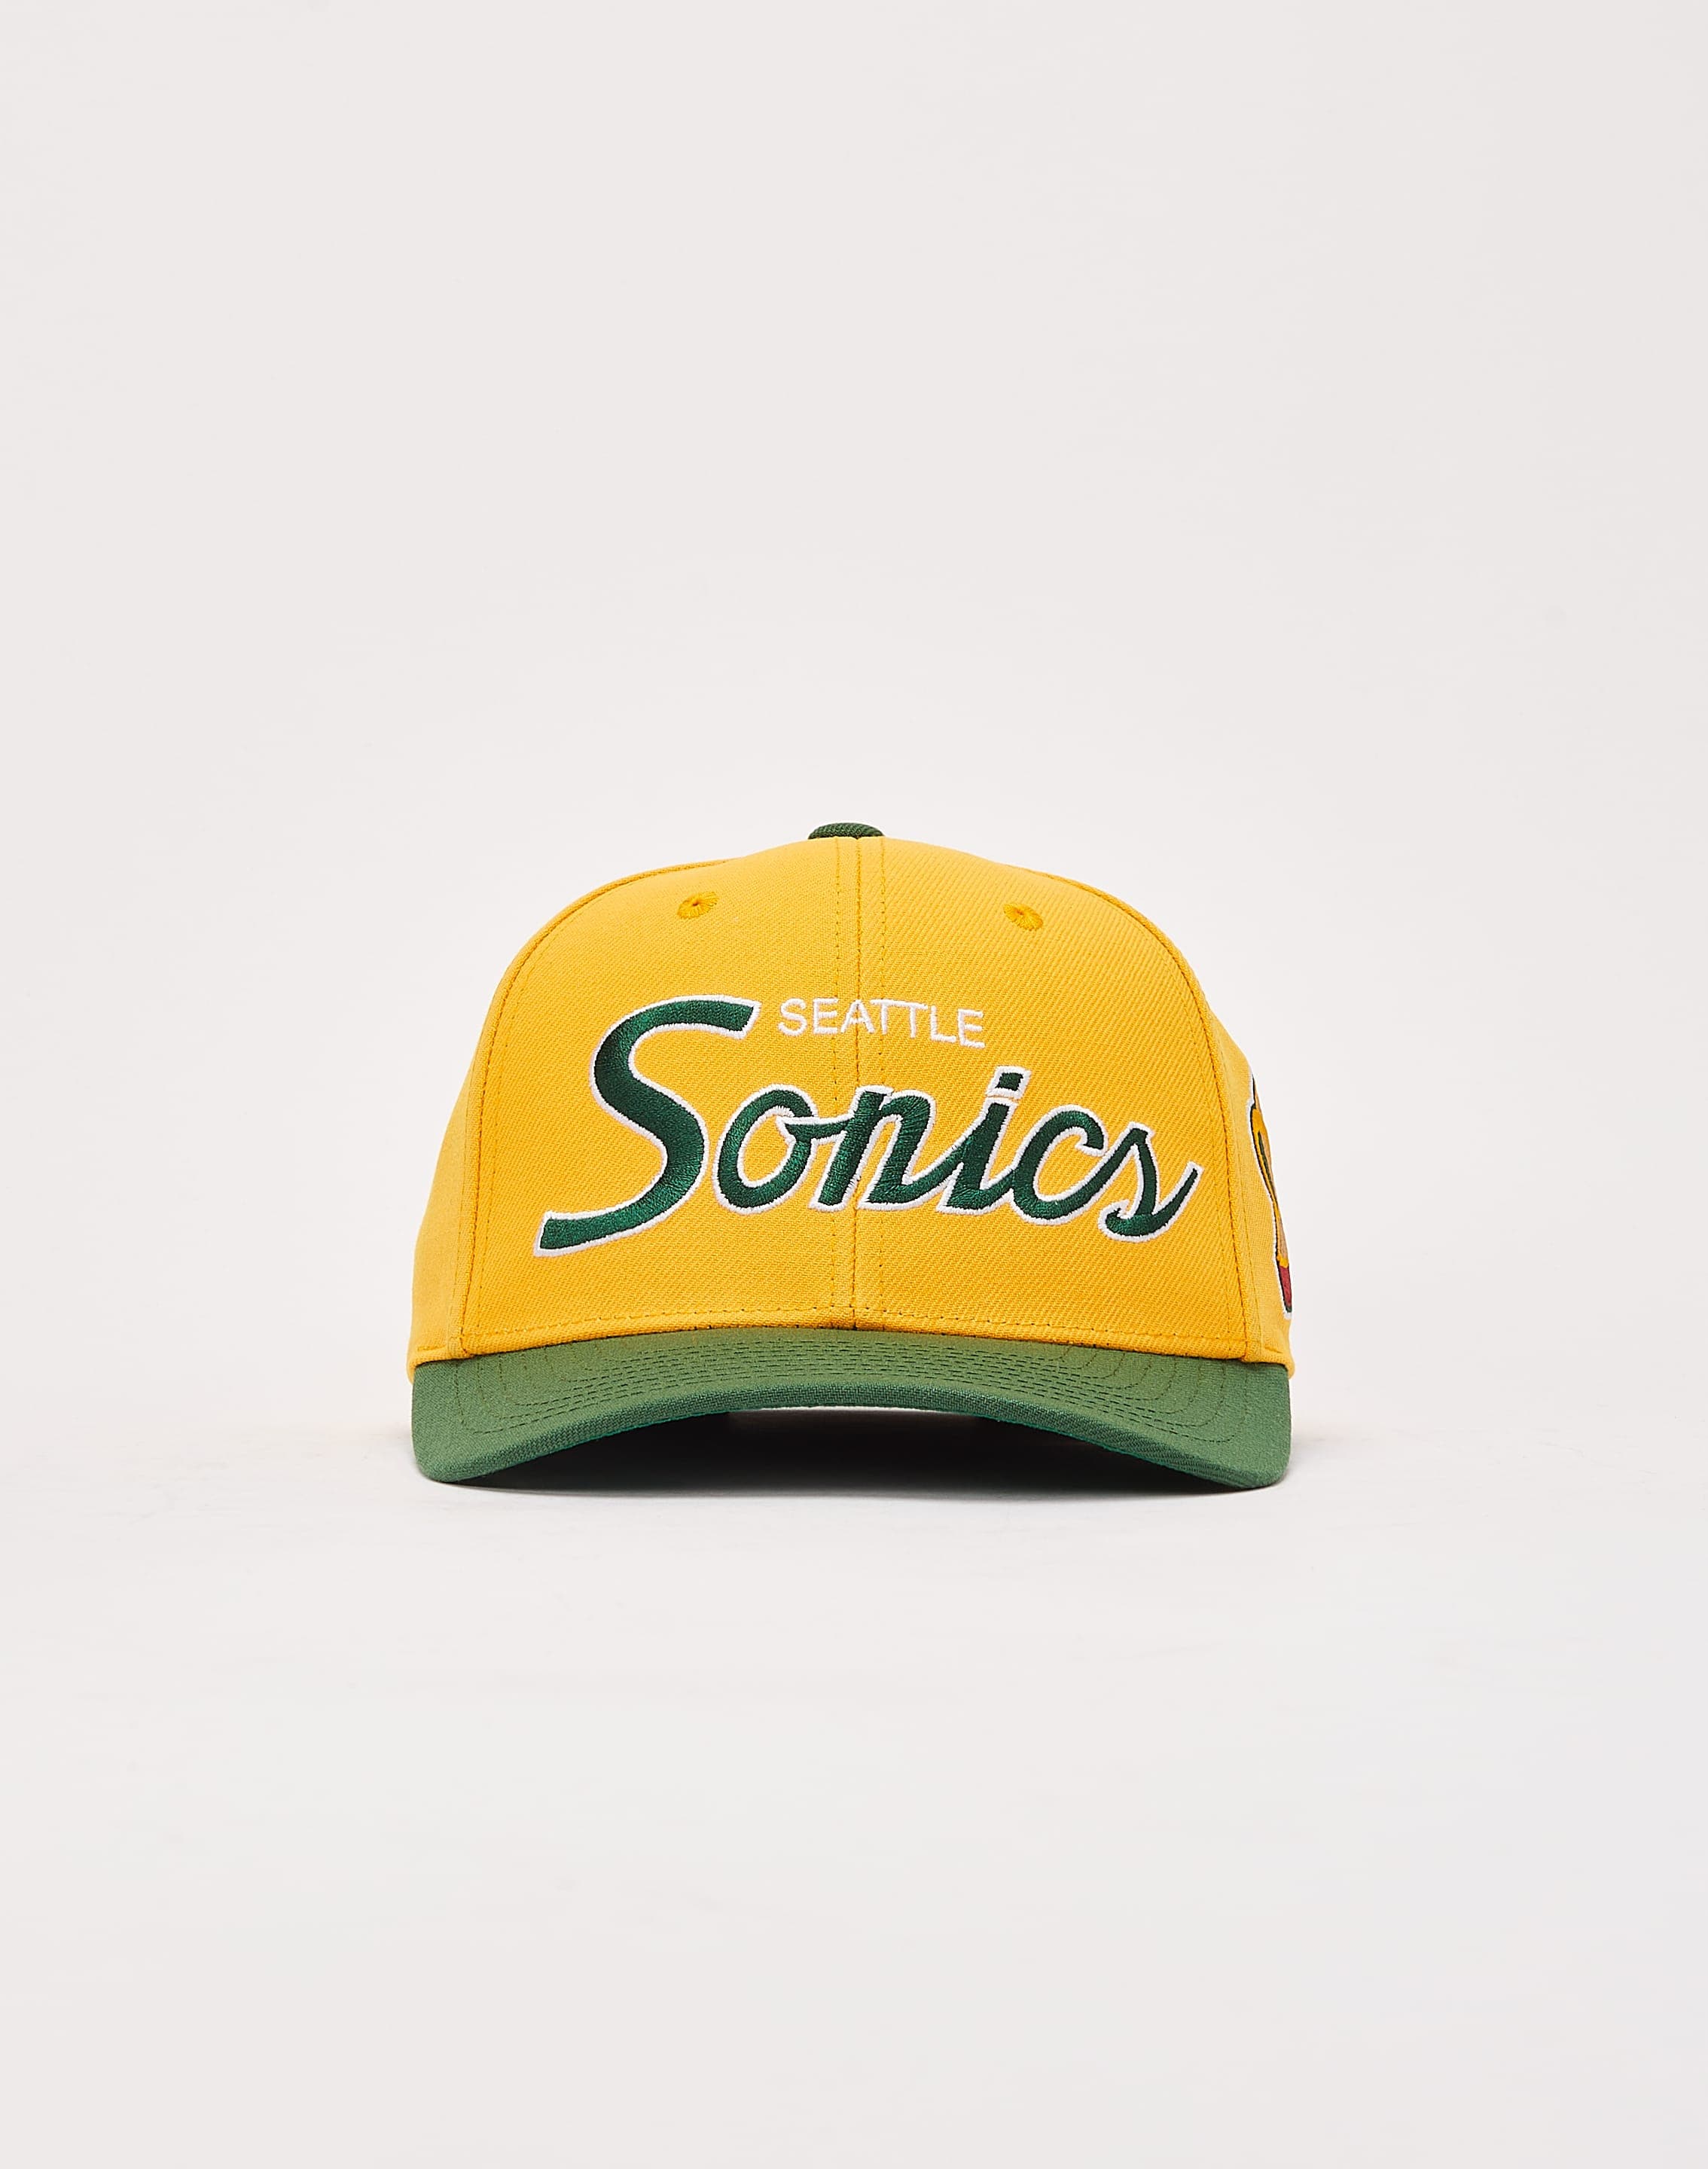 Mitchell & Ness Pairs with the NBA for a Collection of Knit Hats